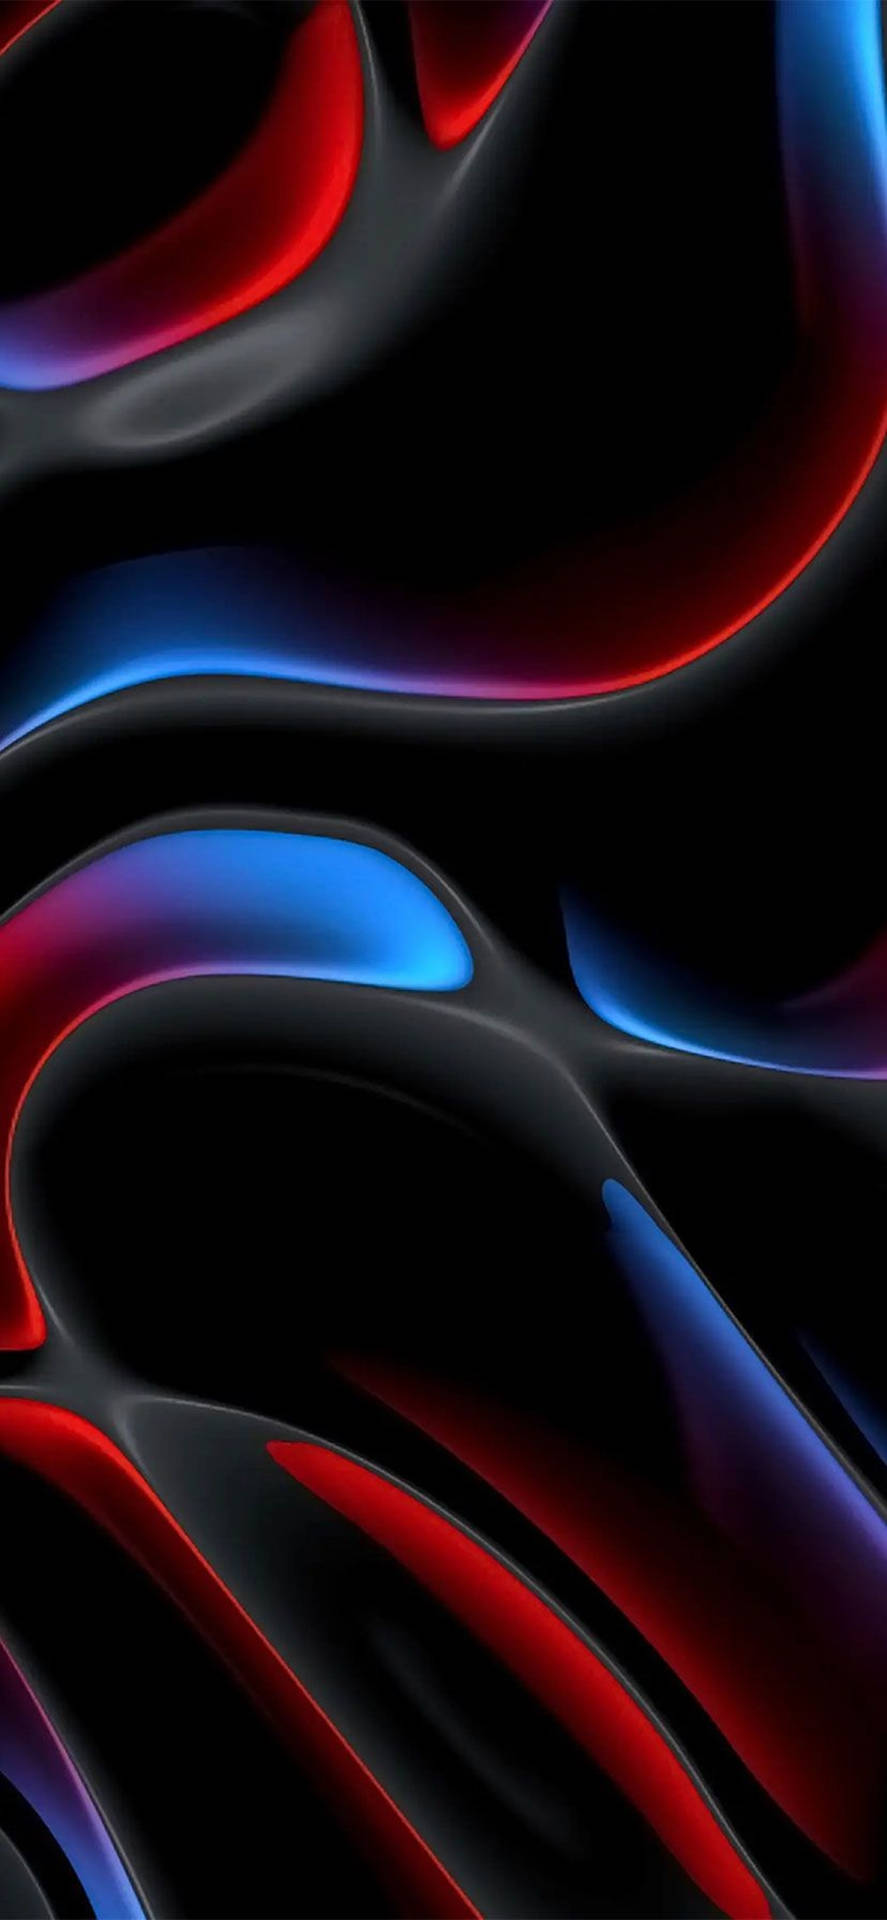 Artistic Blue-red-black Blob Pattern On Cool Iphone 11